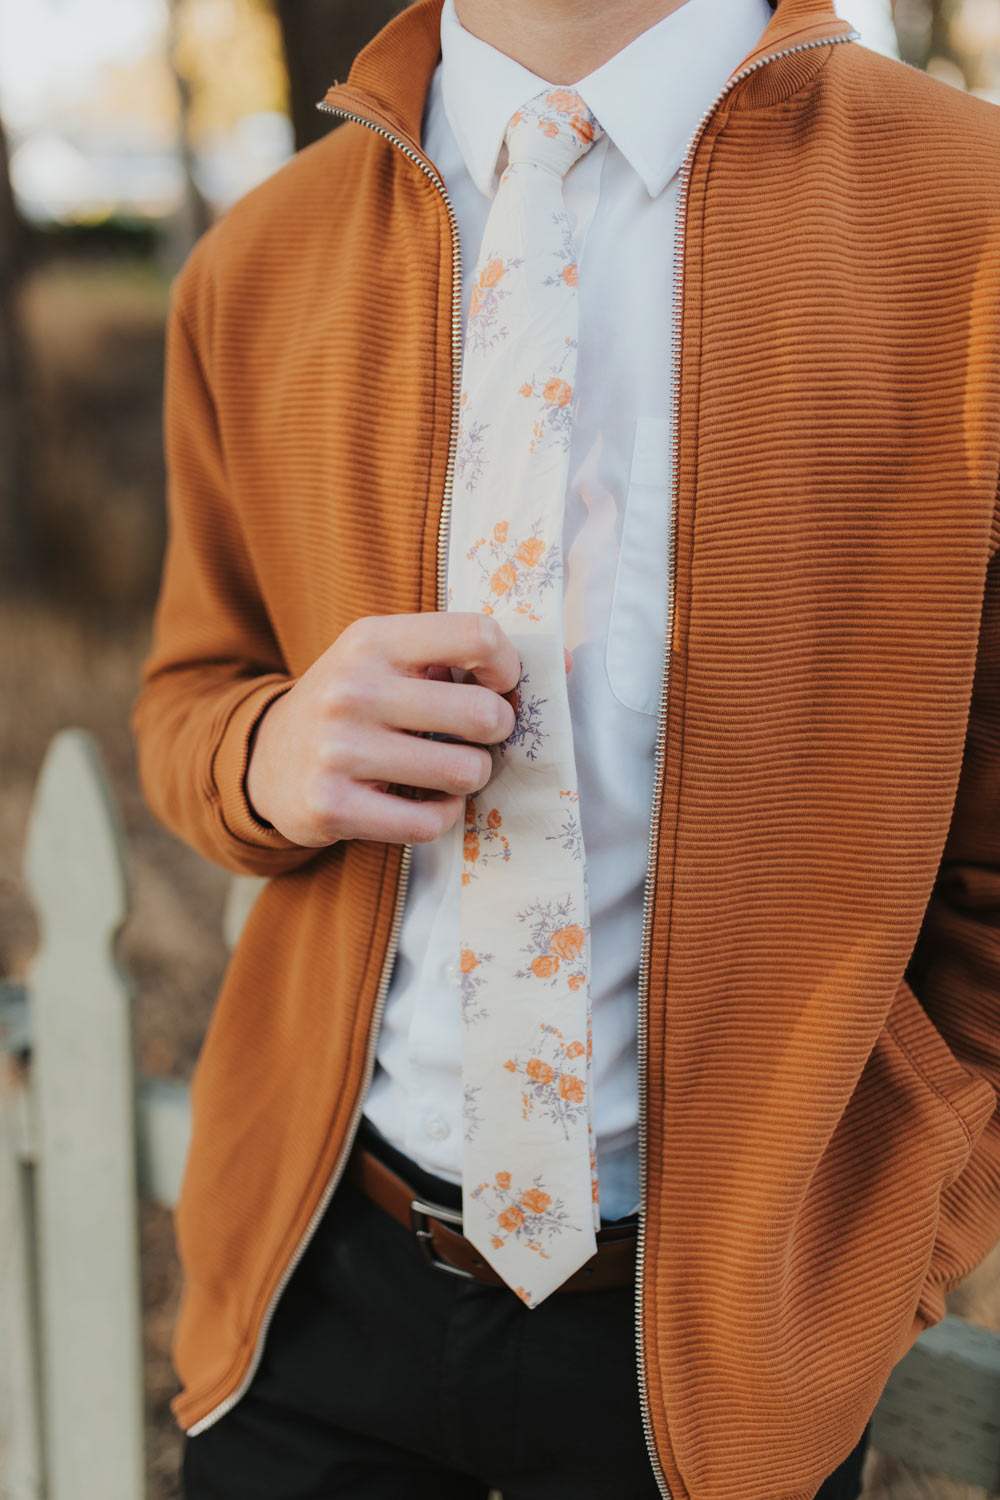 Harvest Blossom Tie worn with a white shirt, orange cardigan and black pants.